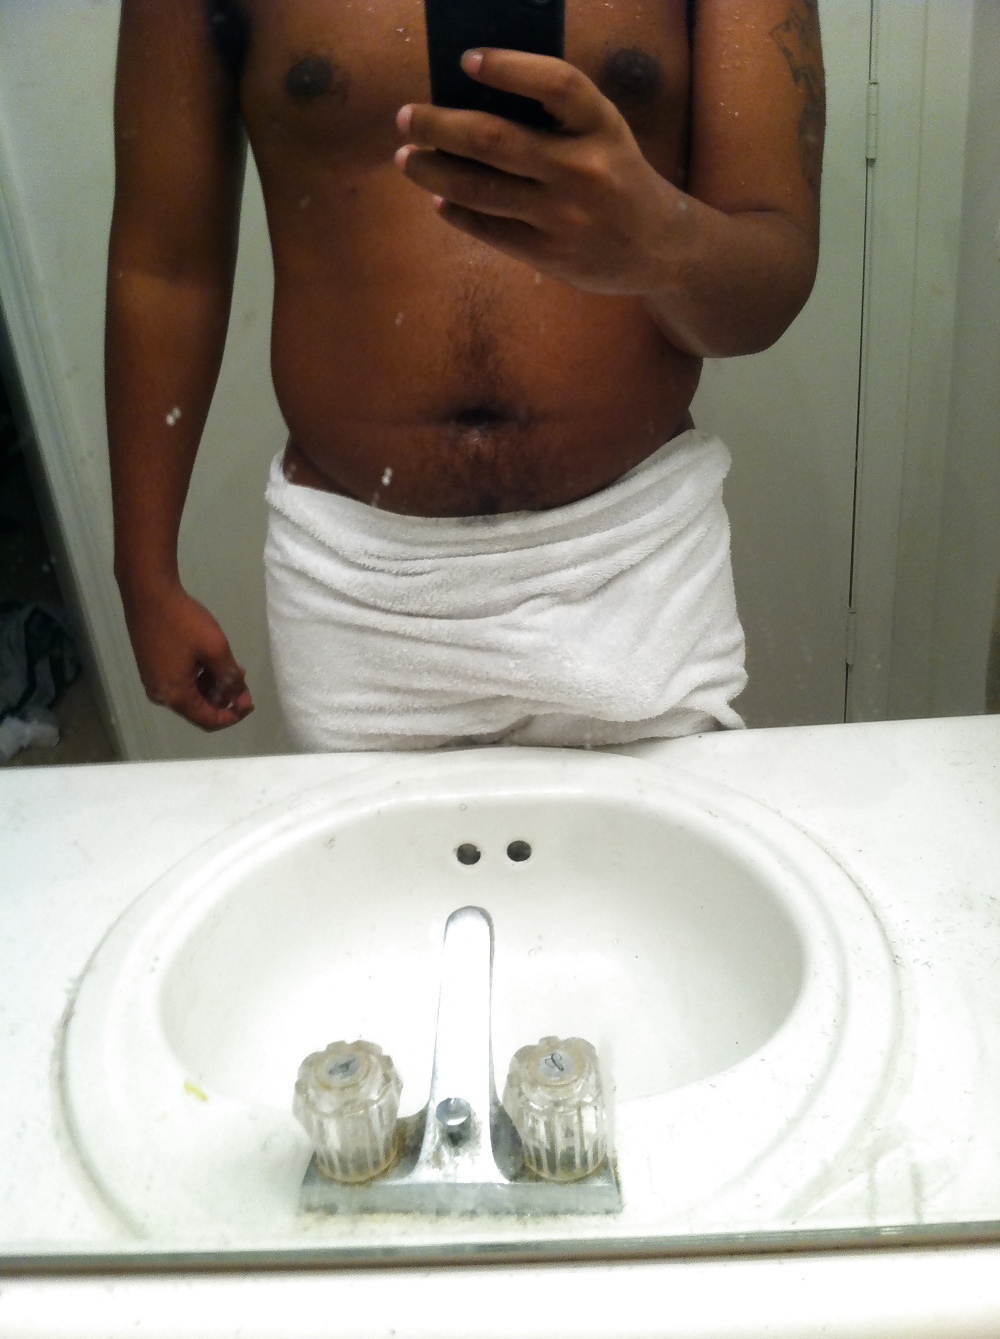 Fresh out of the shower #5935072